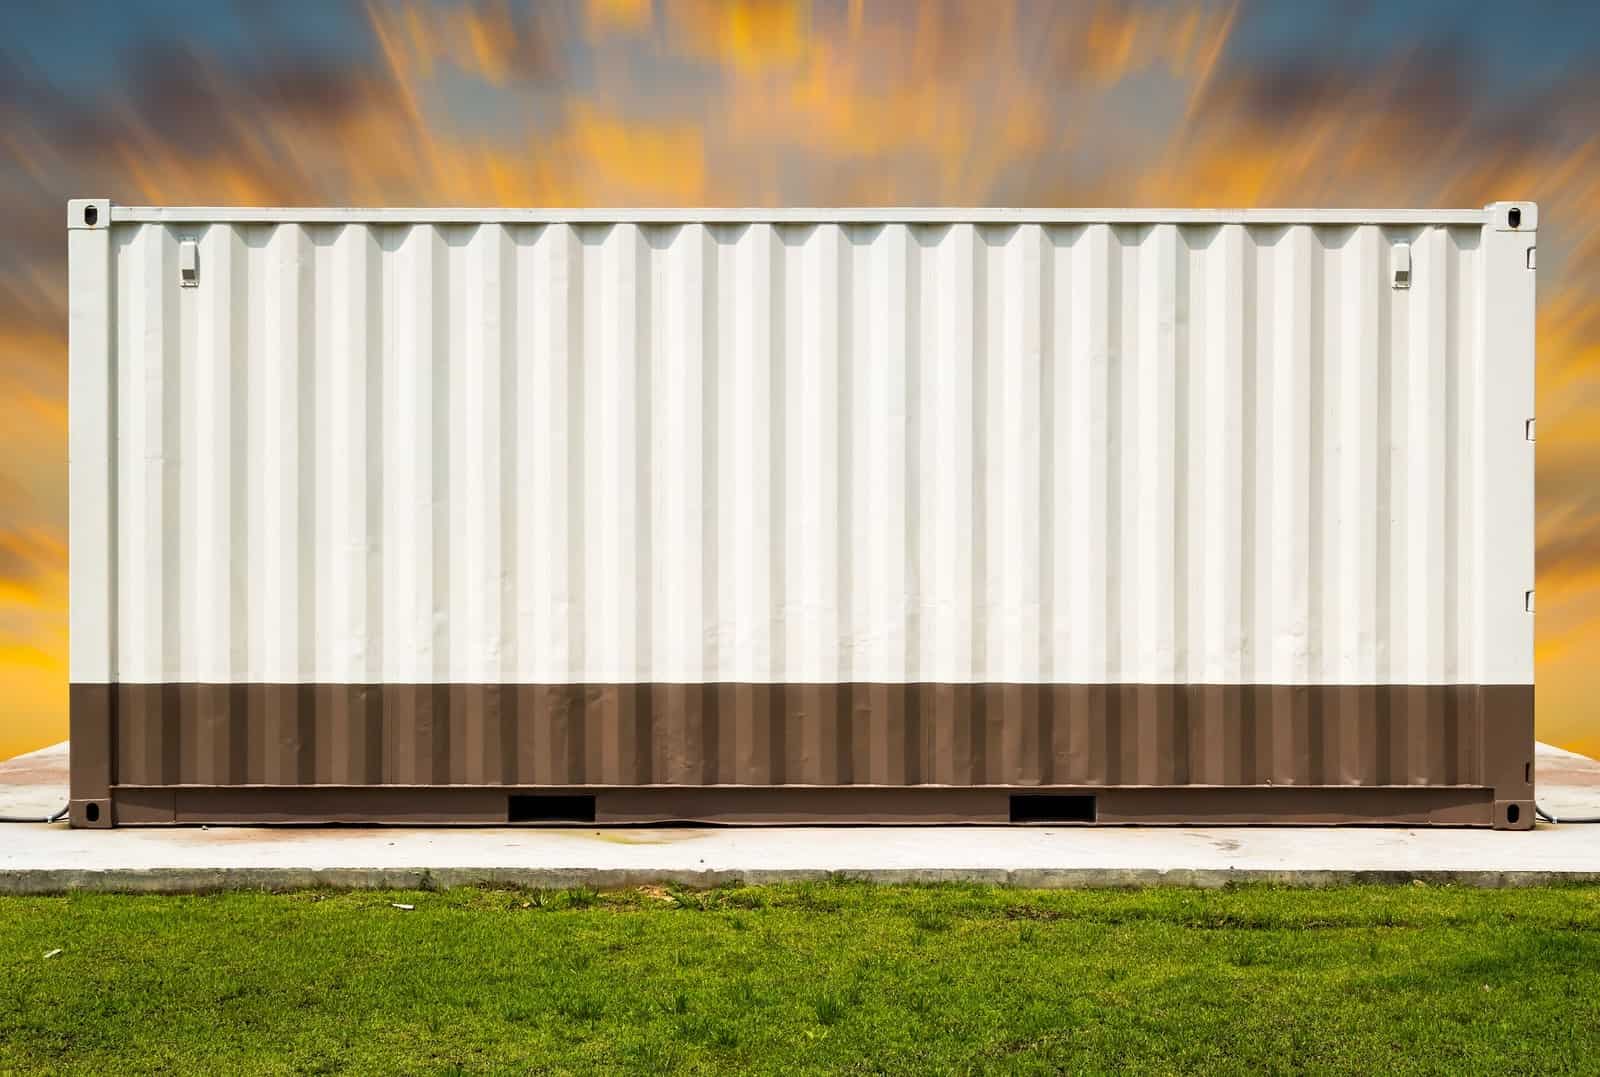 Used Shipping Containers for Sale Are Your Best Choice of Material